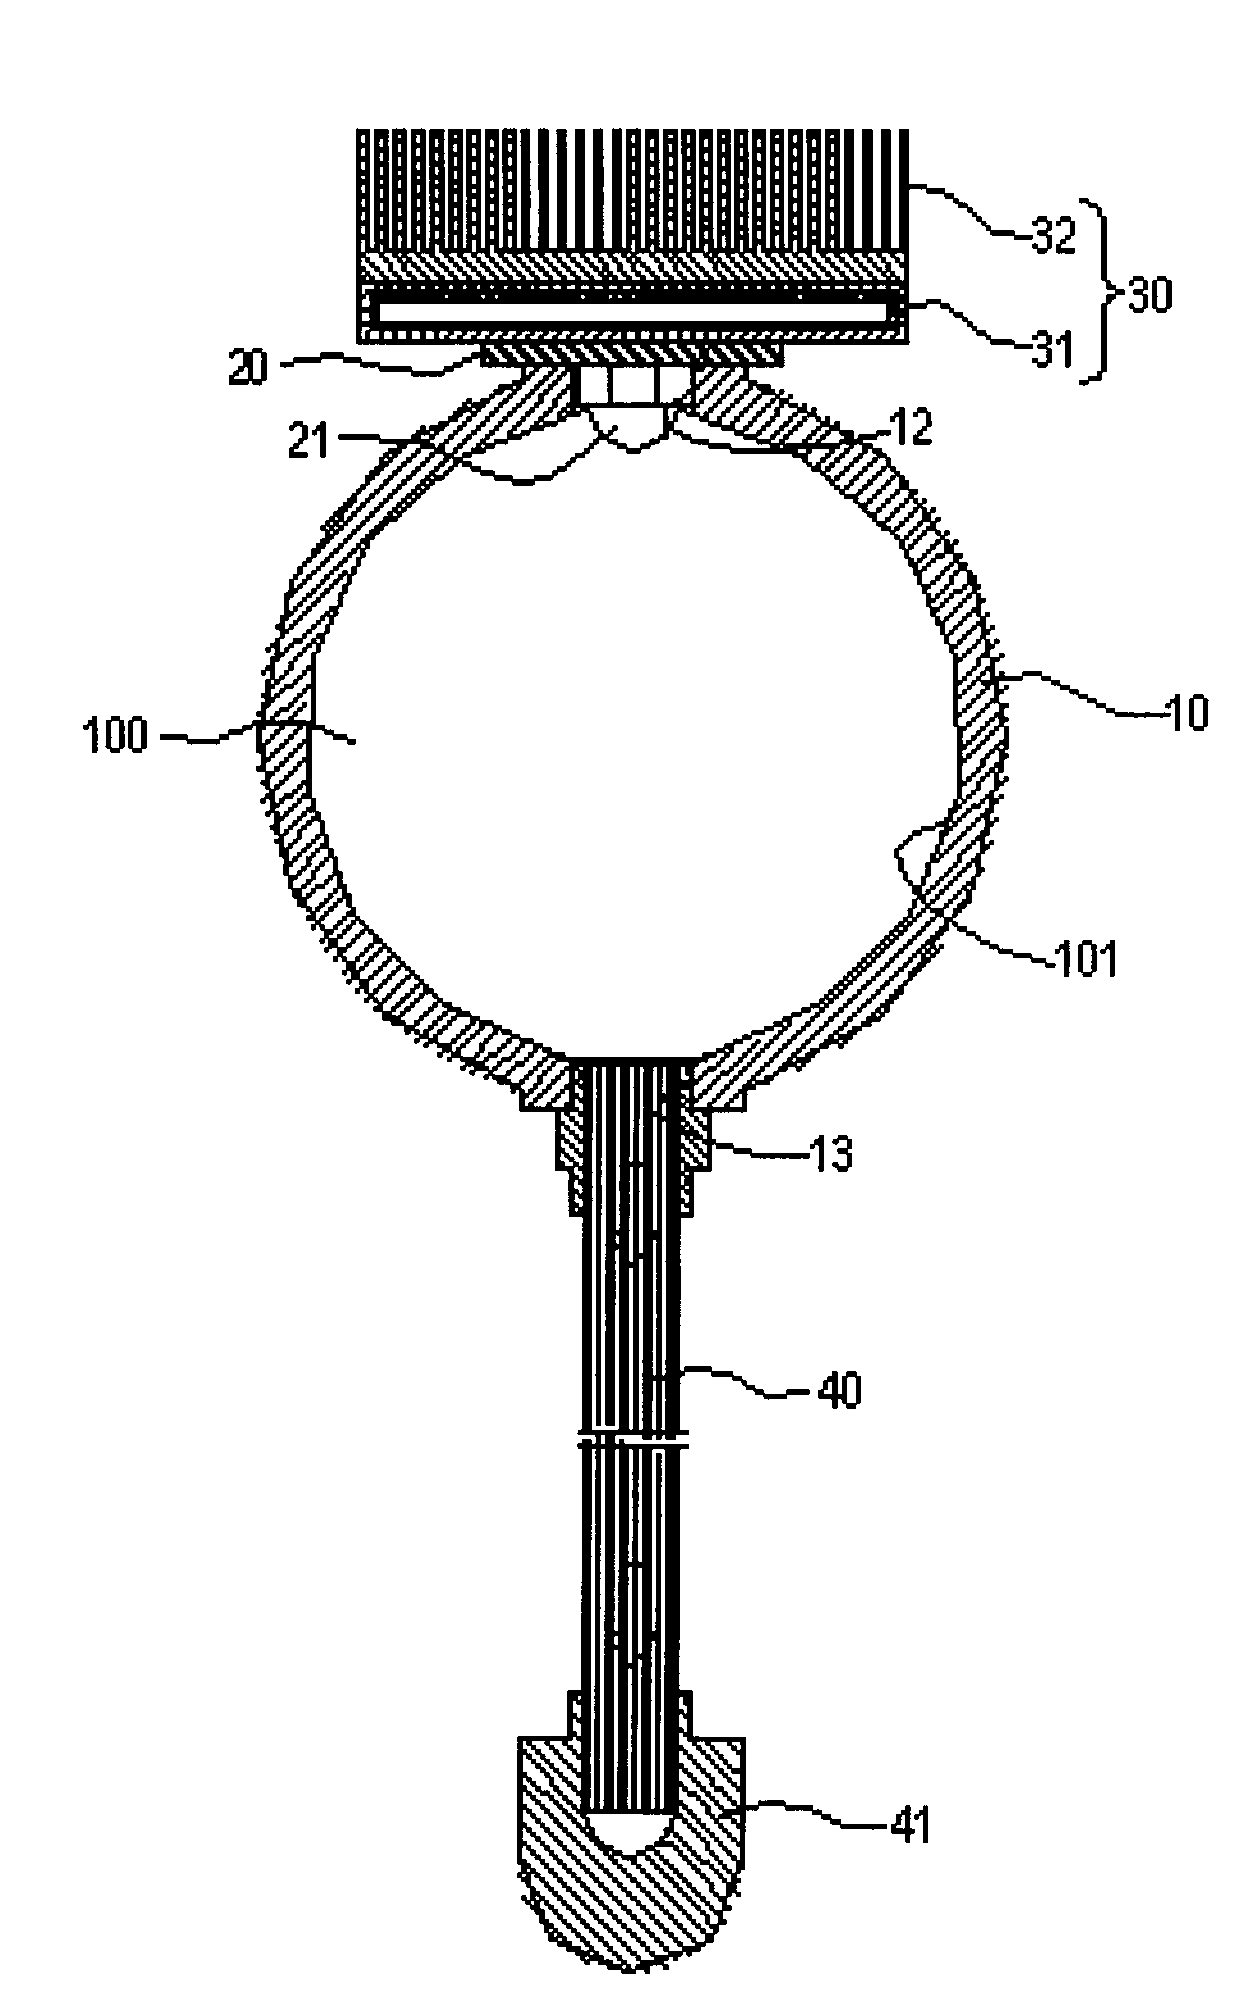 LED (Light Emitting Diode) light guide structure